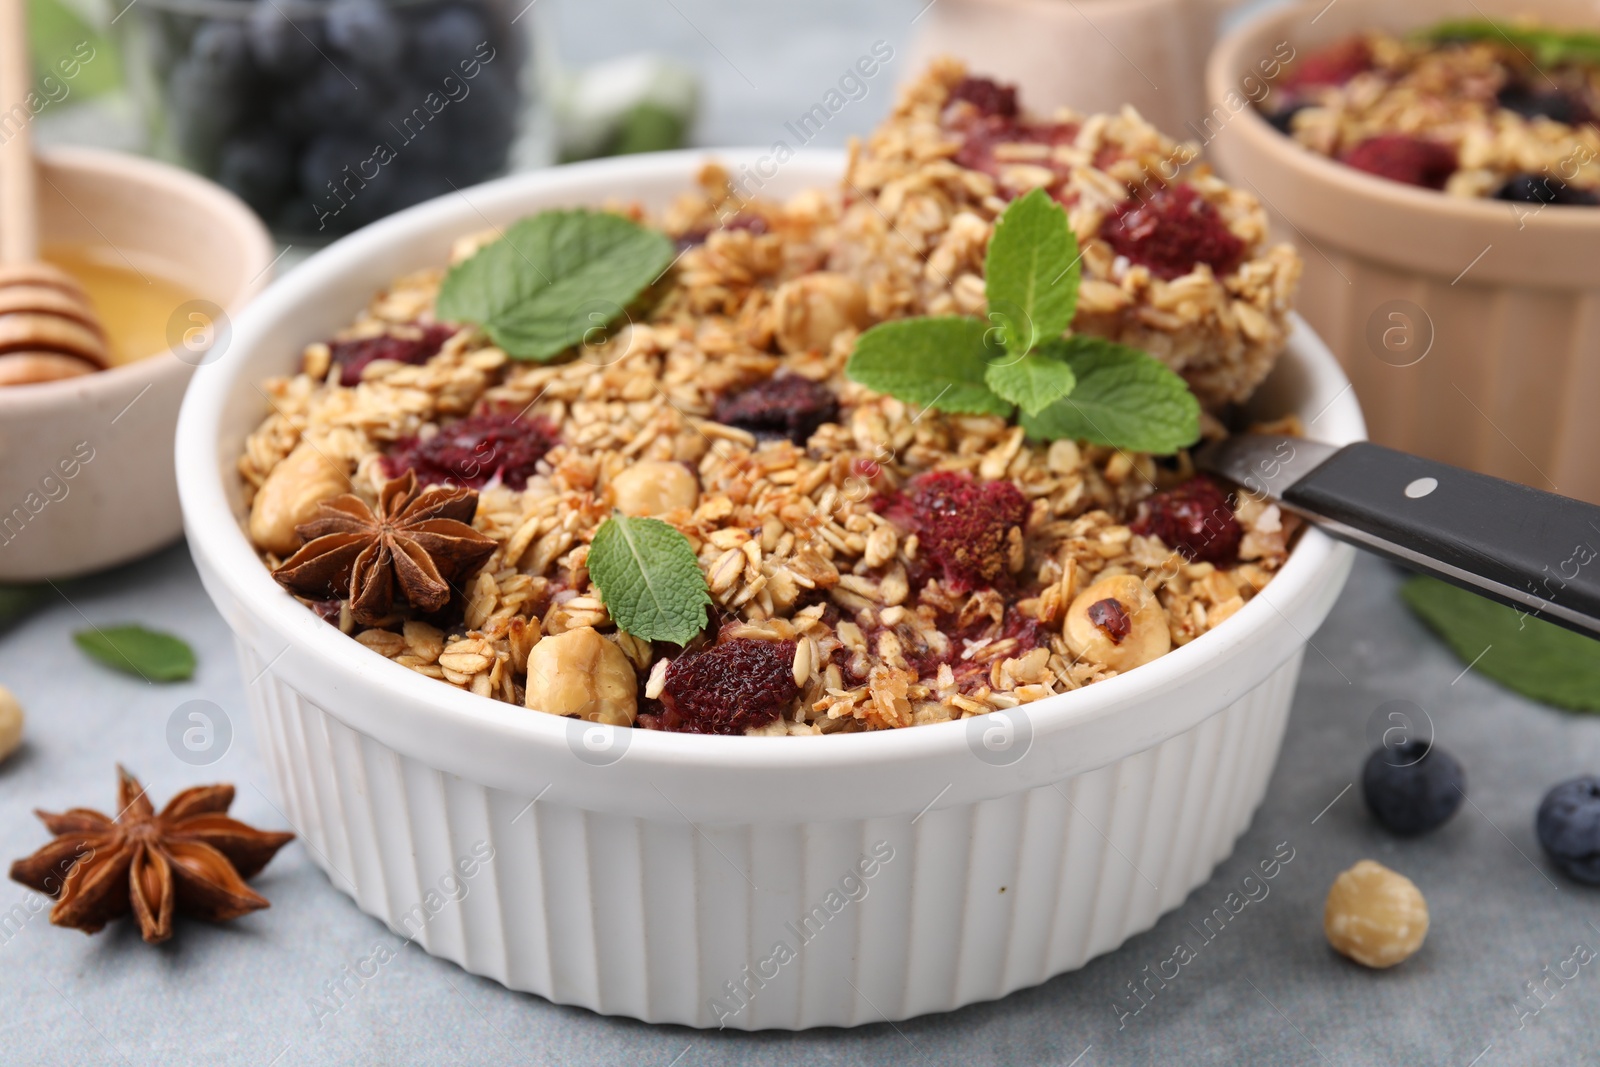 Photo of Tasty baked oatmeal with berries, nuts and anise star on light grey table, closeup